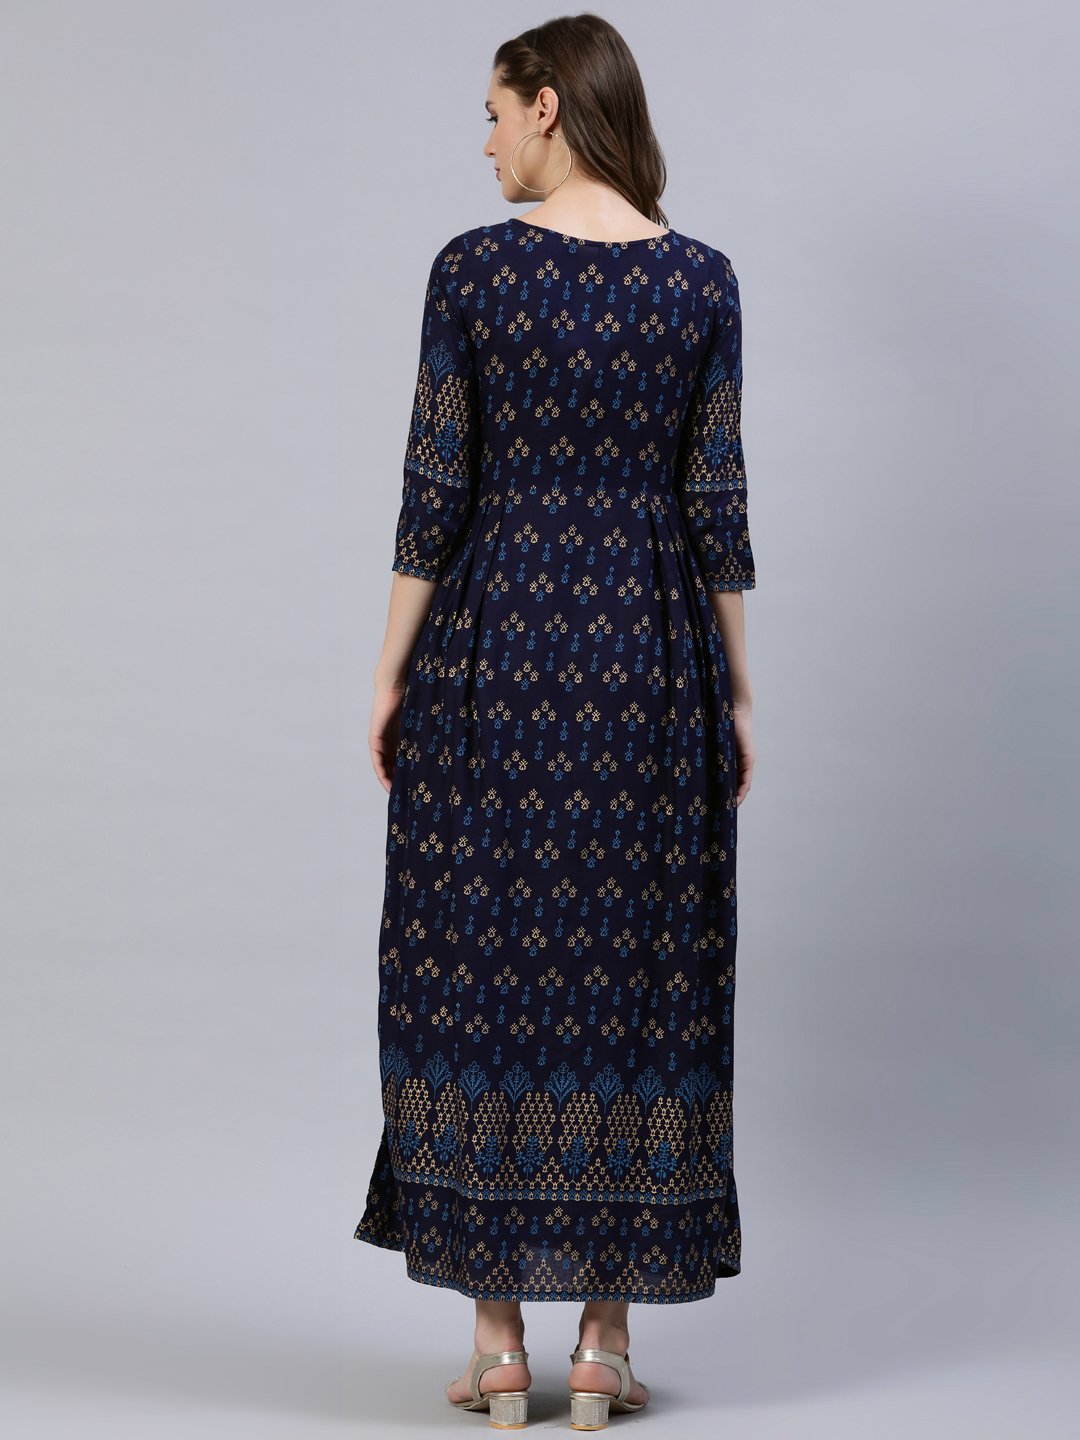 Women's Navy Blue & Gold Printed Dress With Three Quarter Sleeves - Nayo Clothing